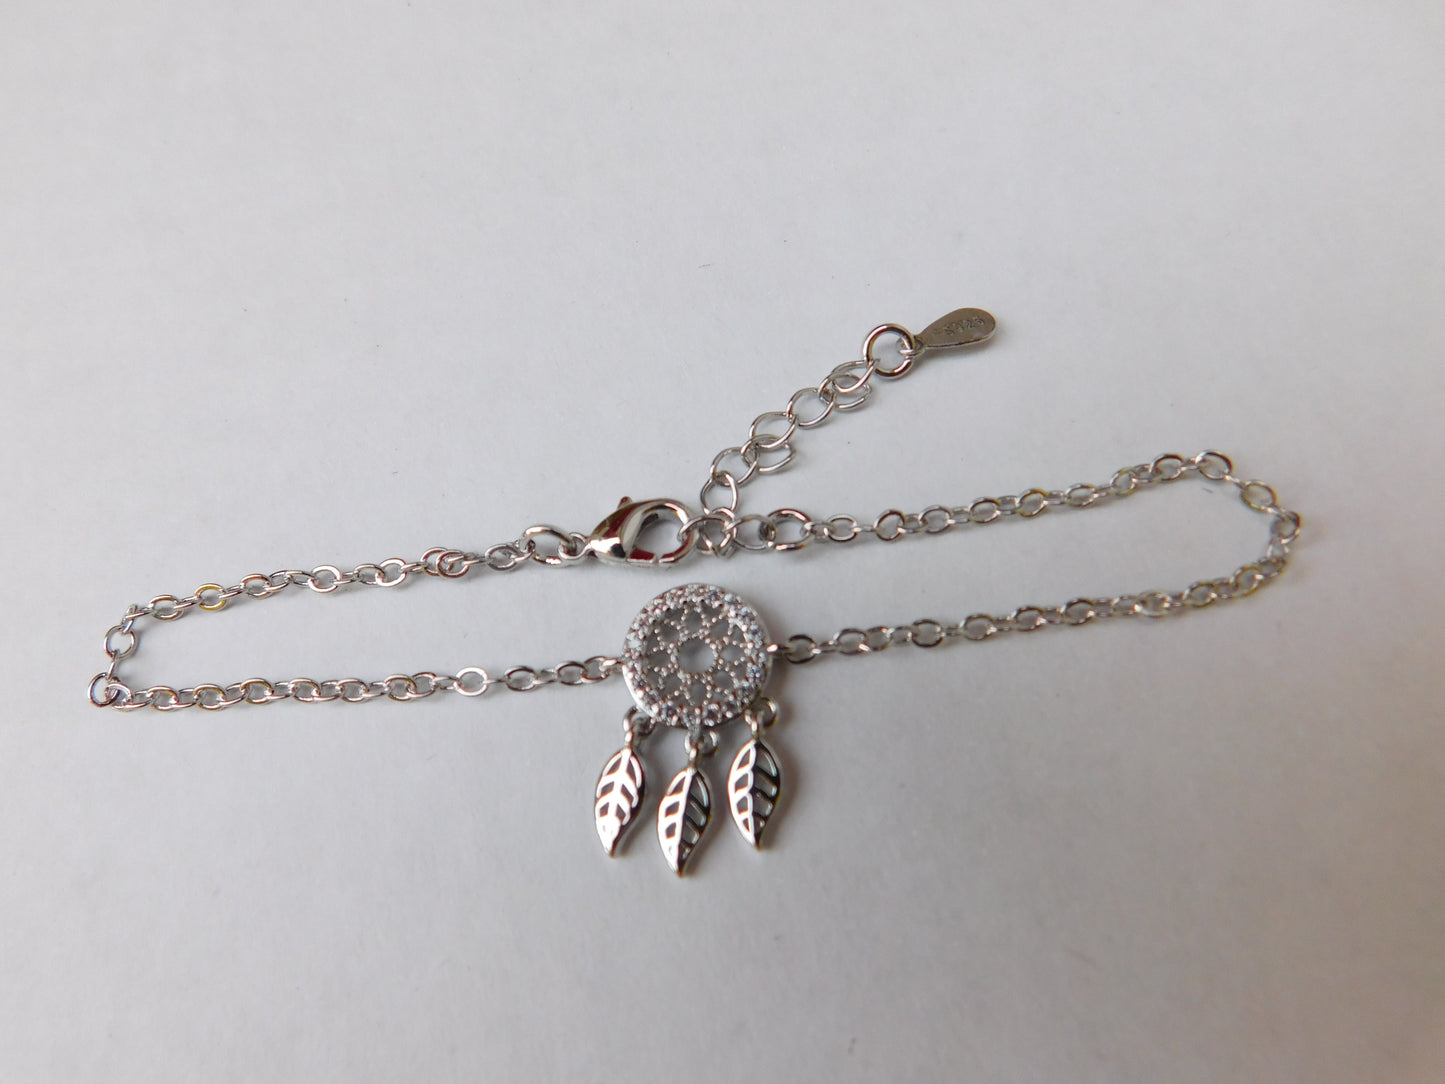 Zircon Dream Catcher Inspired Sterling Silver Chain Link Bracelet/Anklet- Next Day Shipping